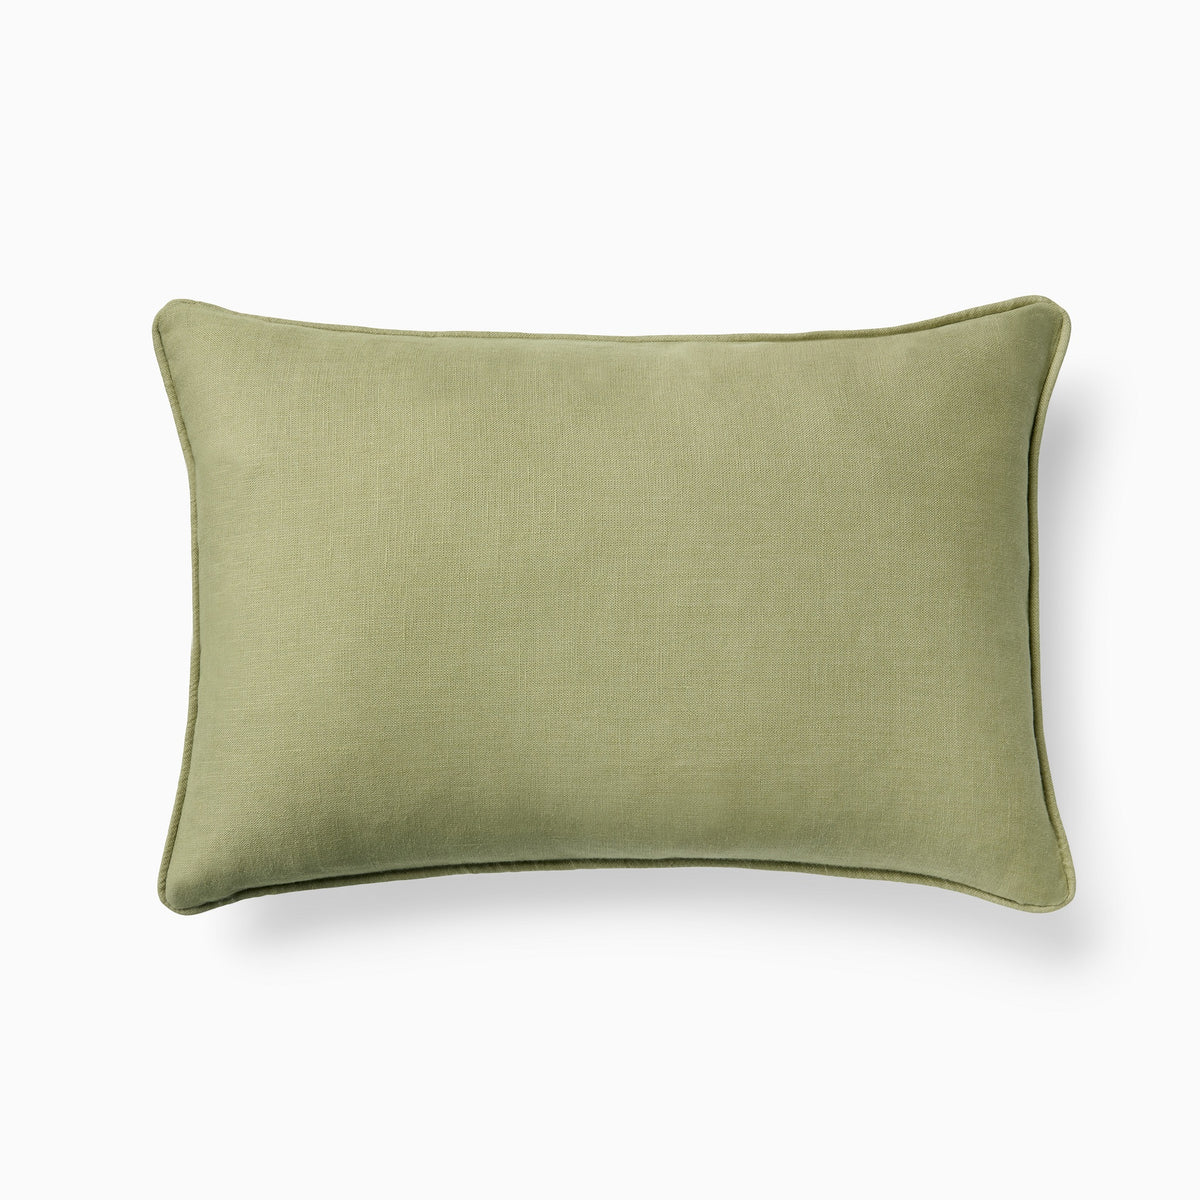 Clear Image of Sferra Manarola Decorative Pillow in Forest/Willow Front